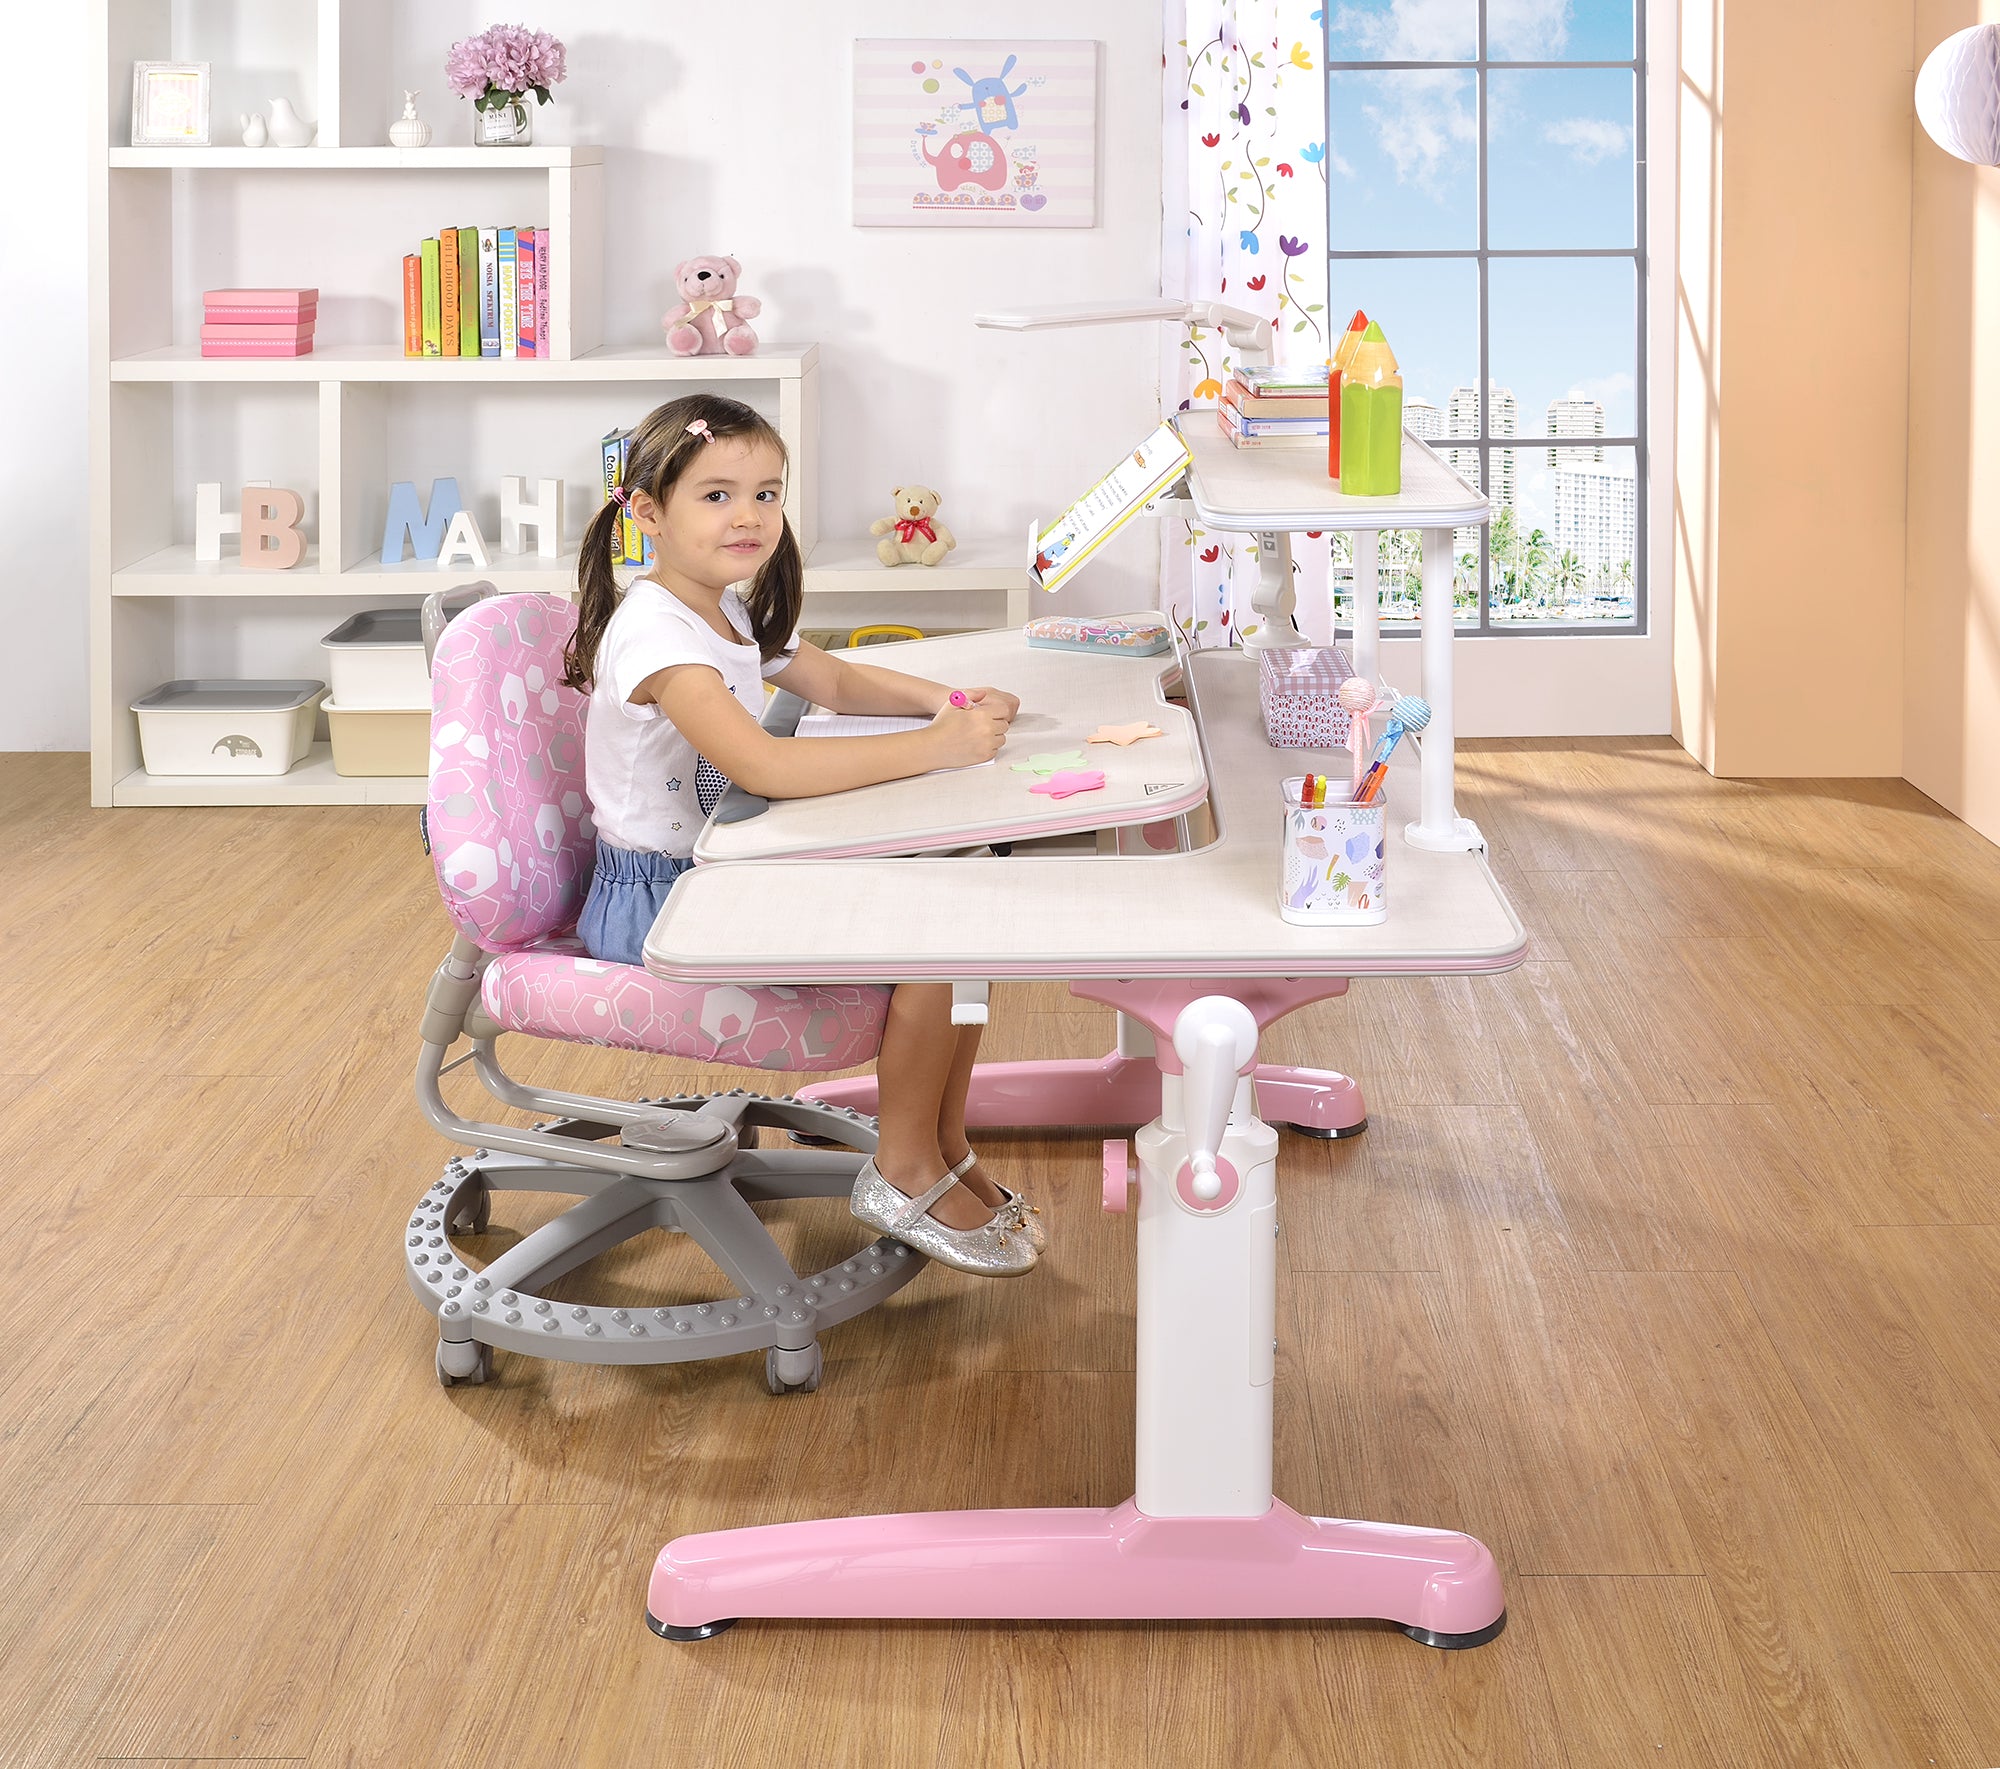 Childrens study desk bule/pink-learning stations that are height-adjustable, tilt-adjustable, and grow with the child – simply ergonomic